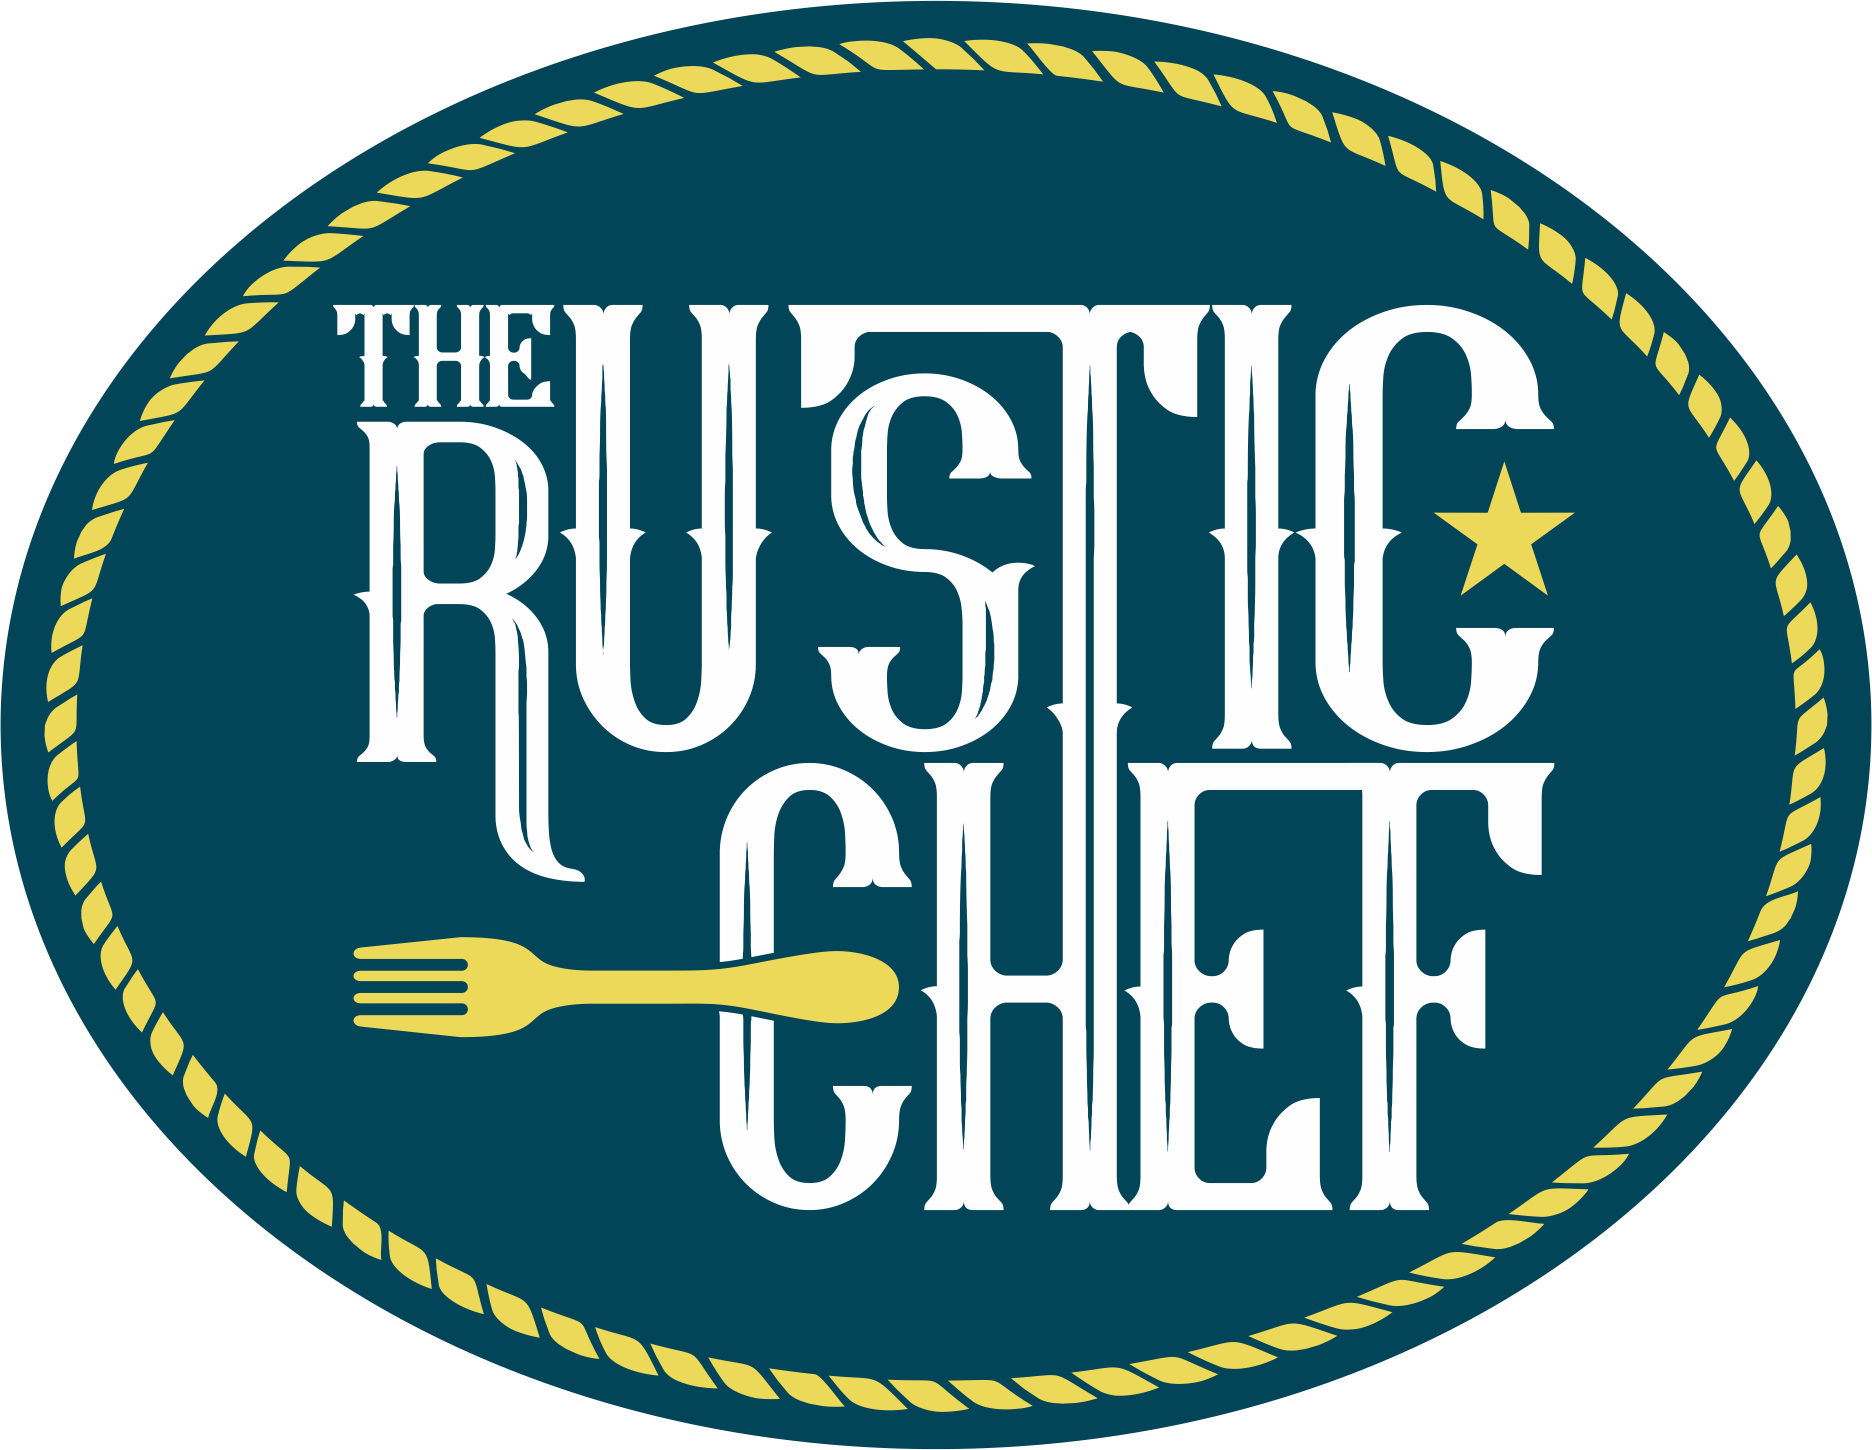 The Rustic Chef logo: a navy oval with "The Rustic Chef" written within it and a fork and star laid within.